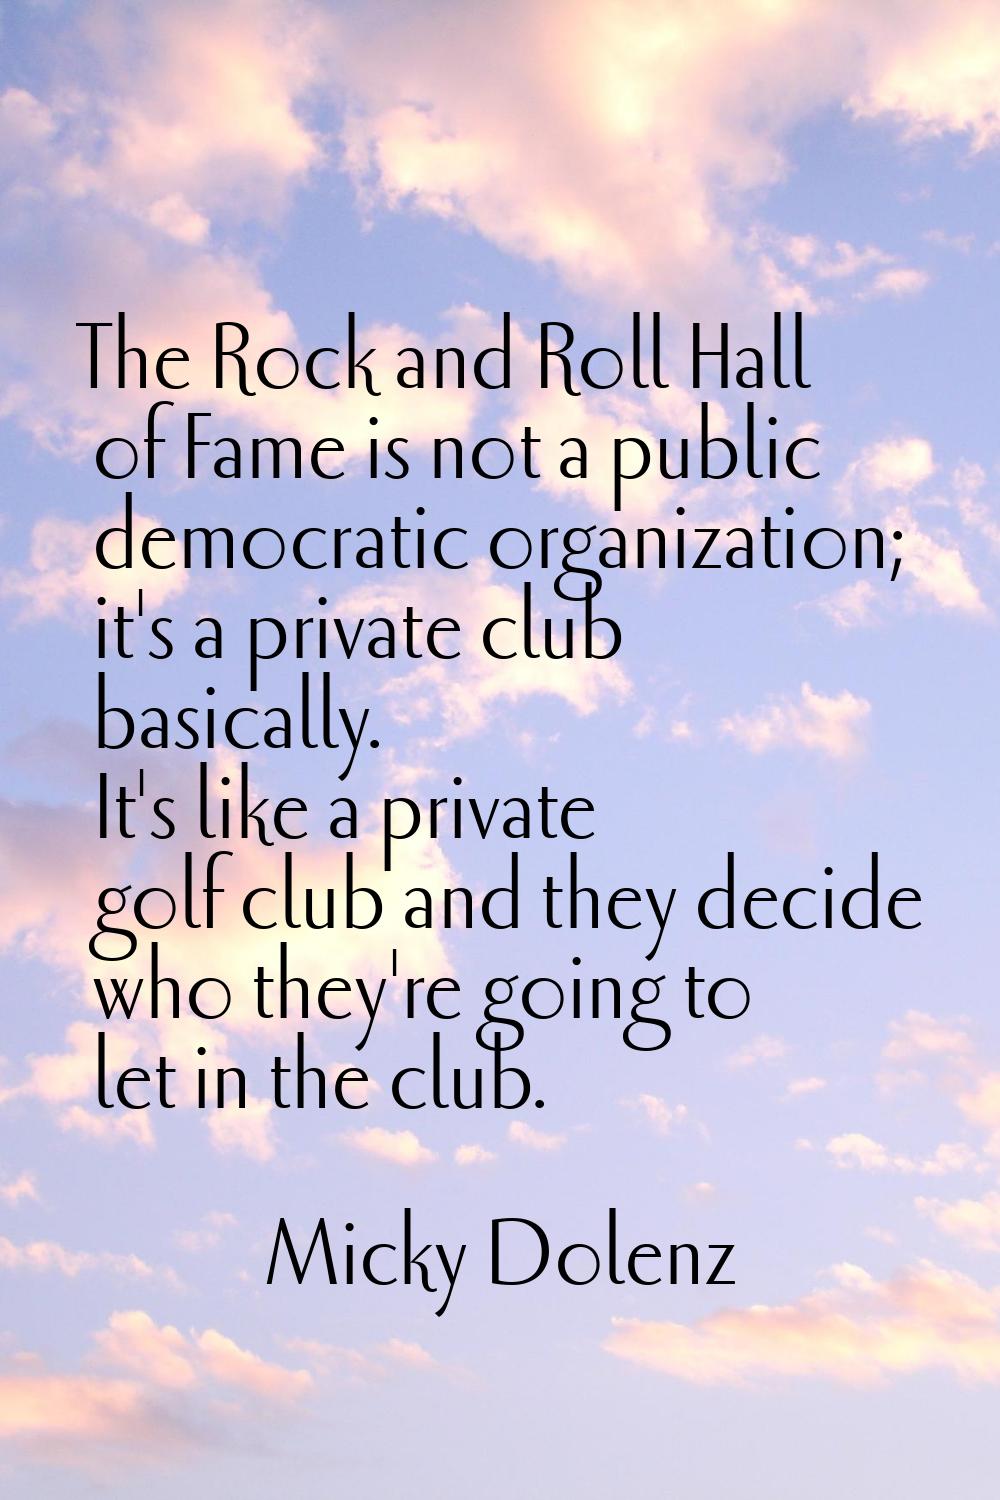 The Rock and Roll Hall of Fame is not a public democratic organization; it's a private club basical